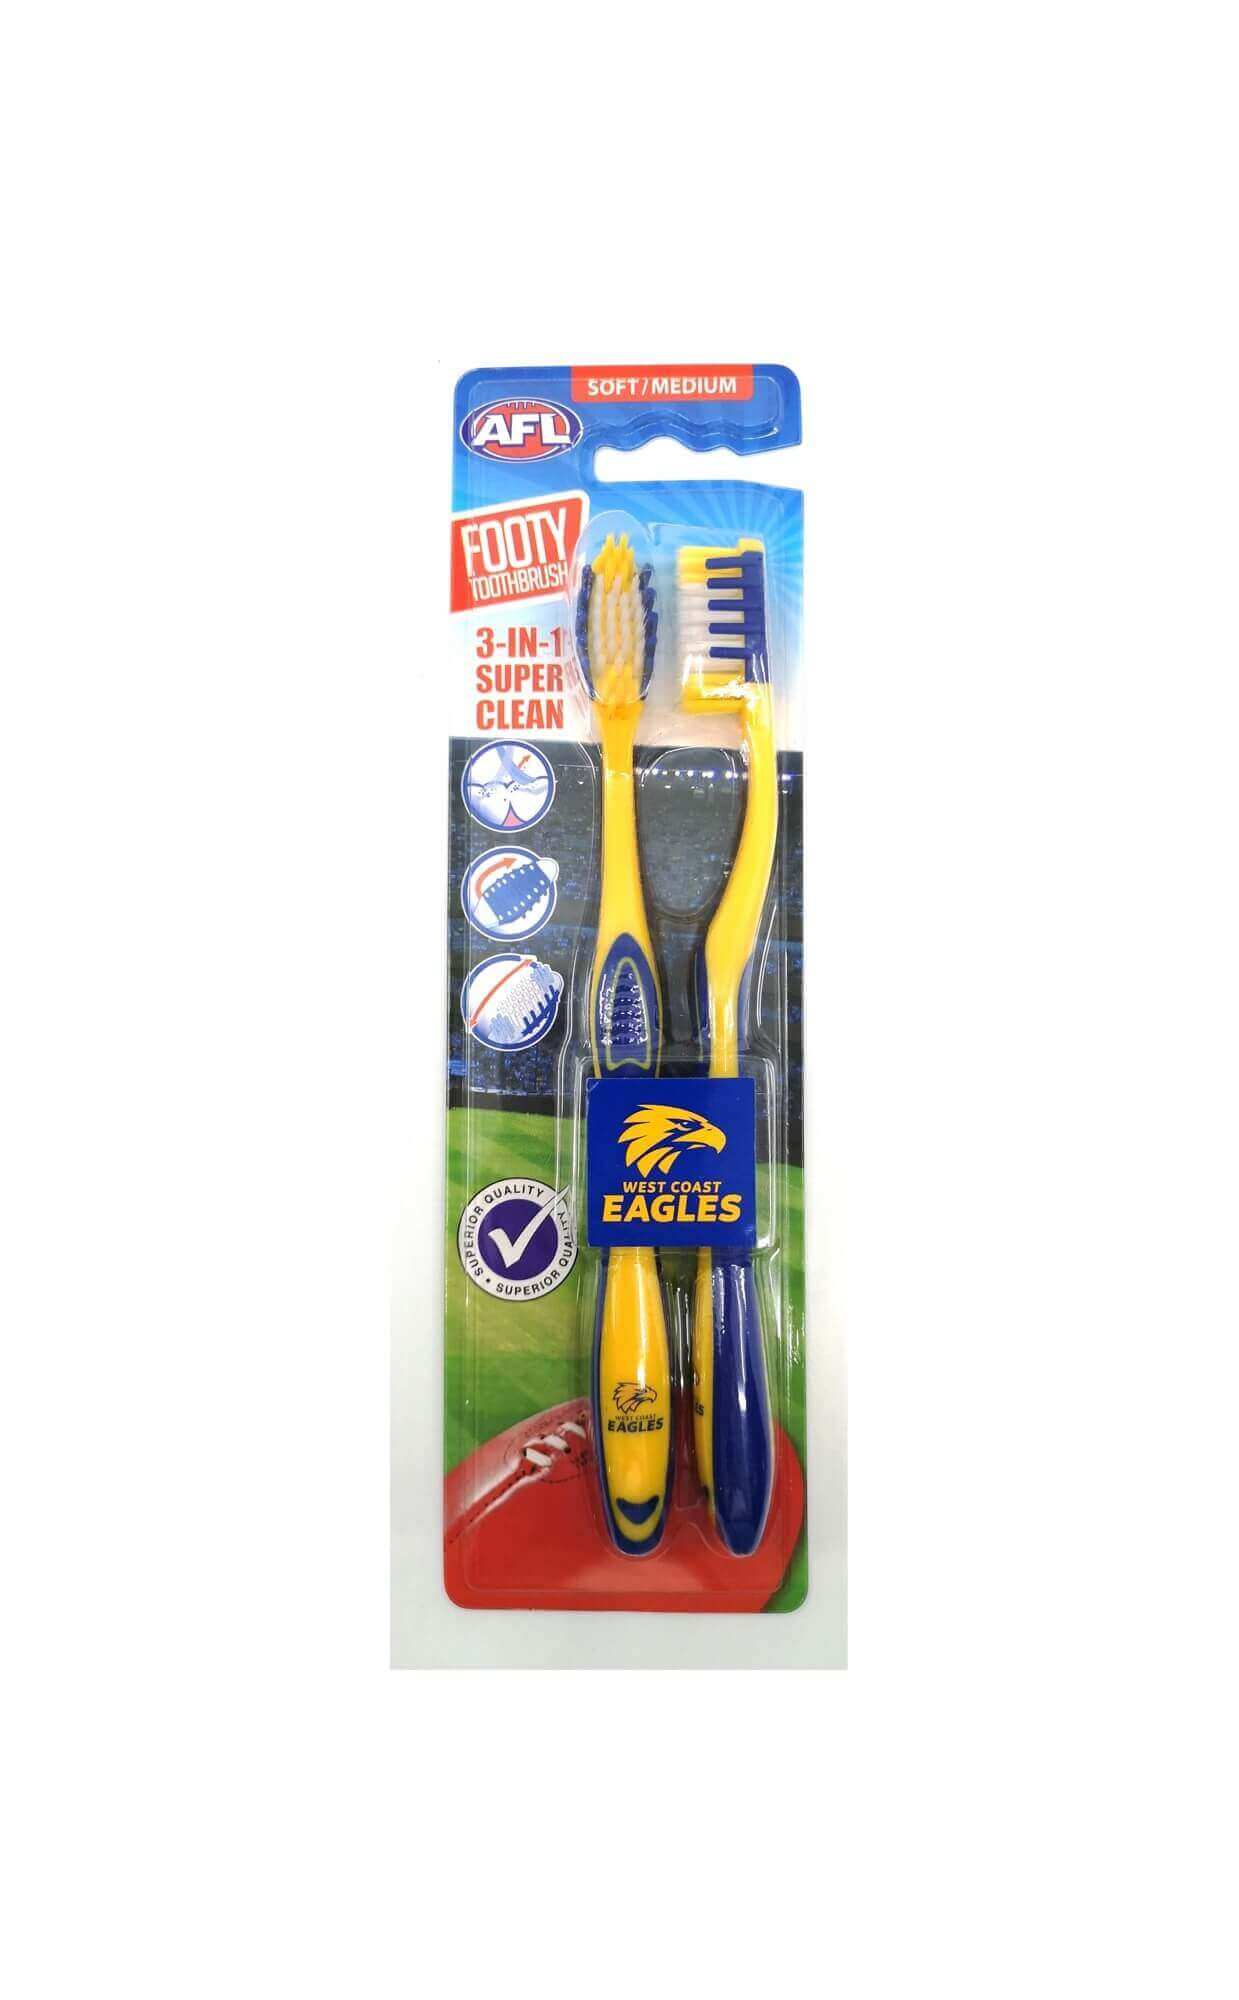 WEST COAST EAGLES AFL TOOTHBRUSH 2 PACK_WEST COAST EAGLES_STUBBY CLUN